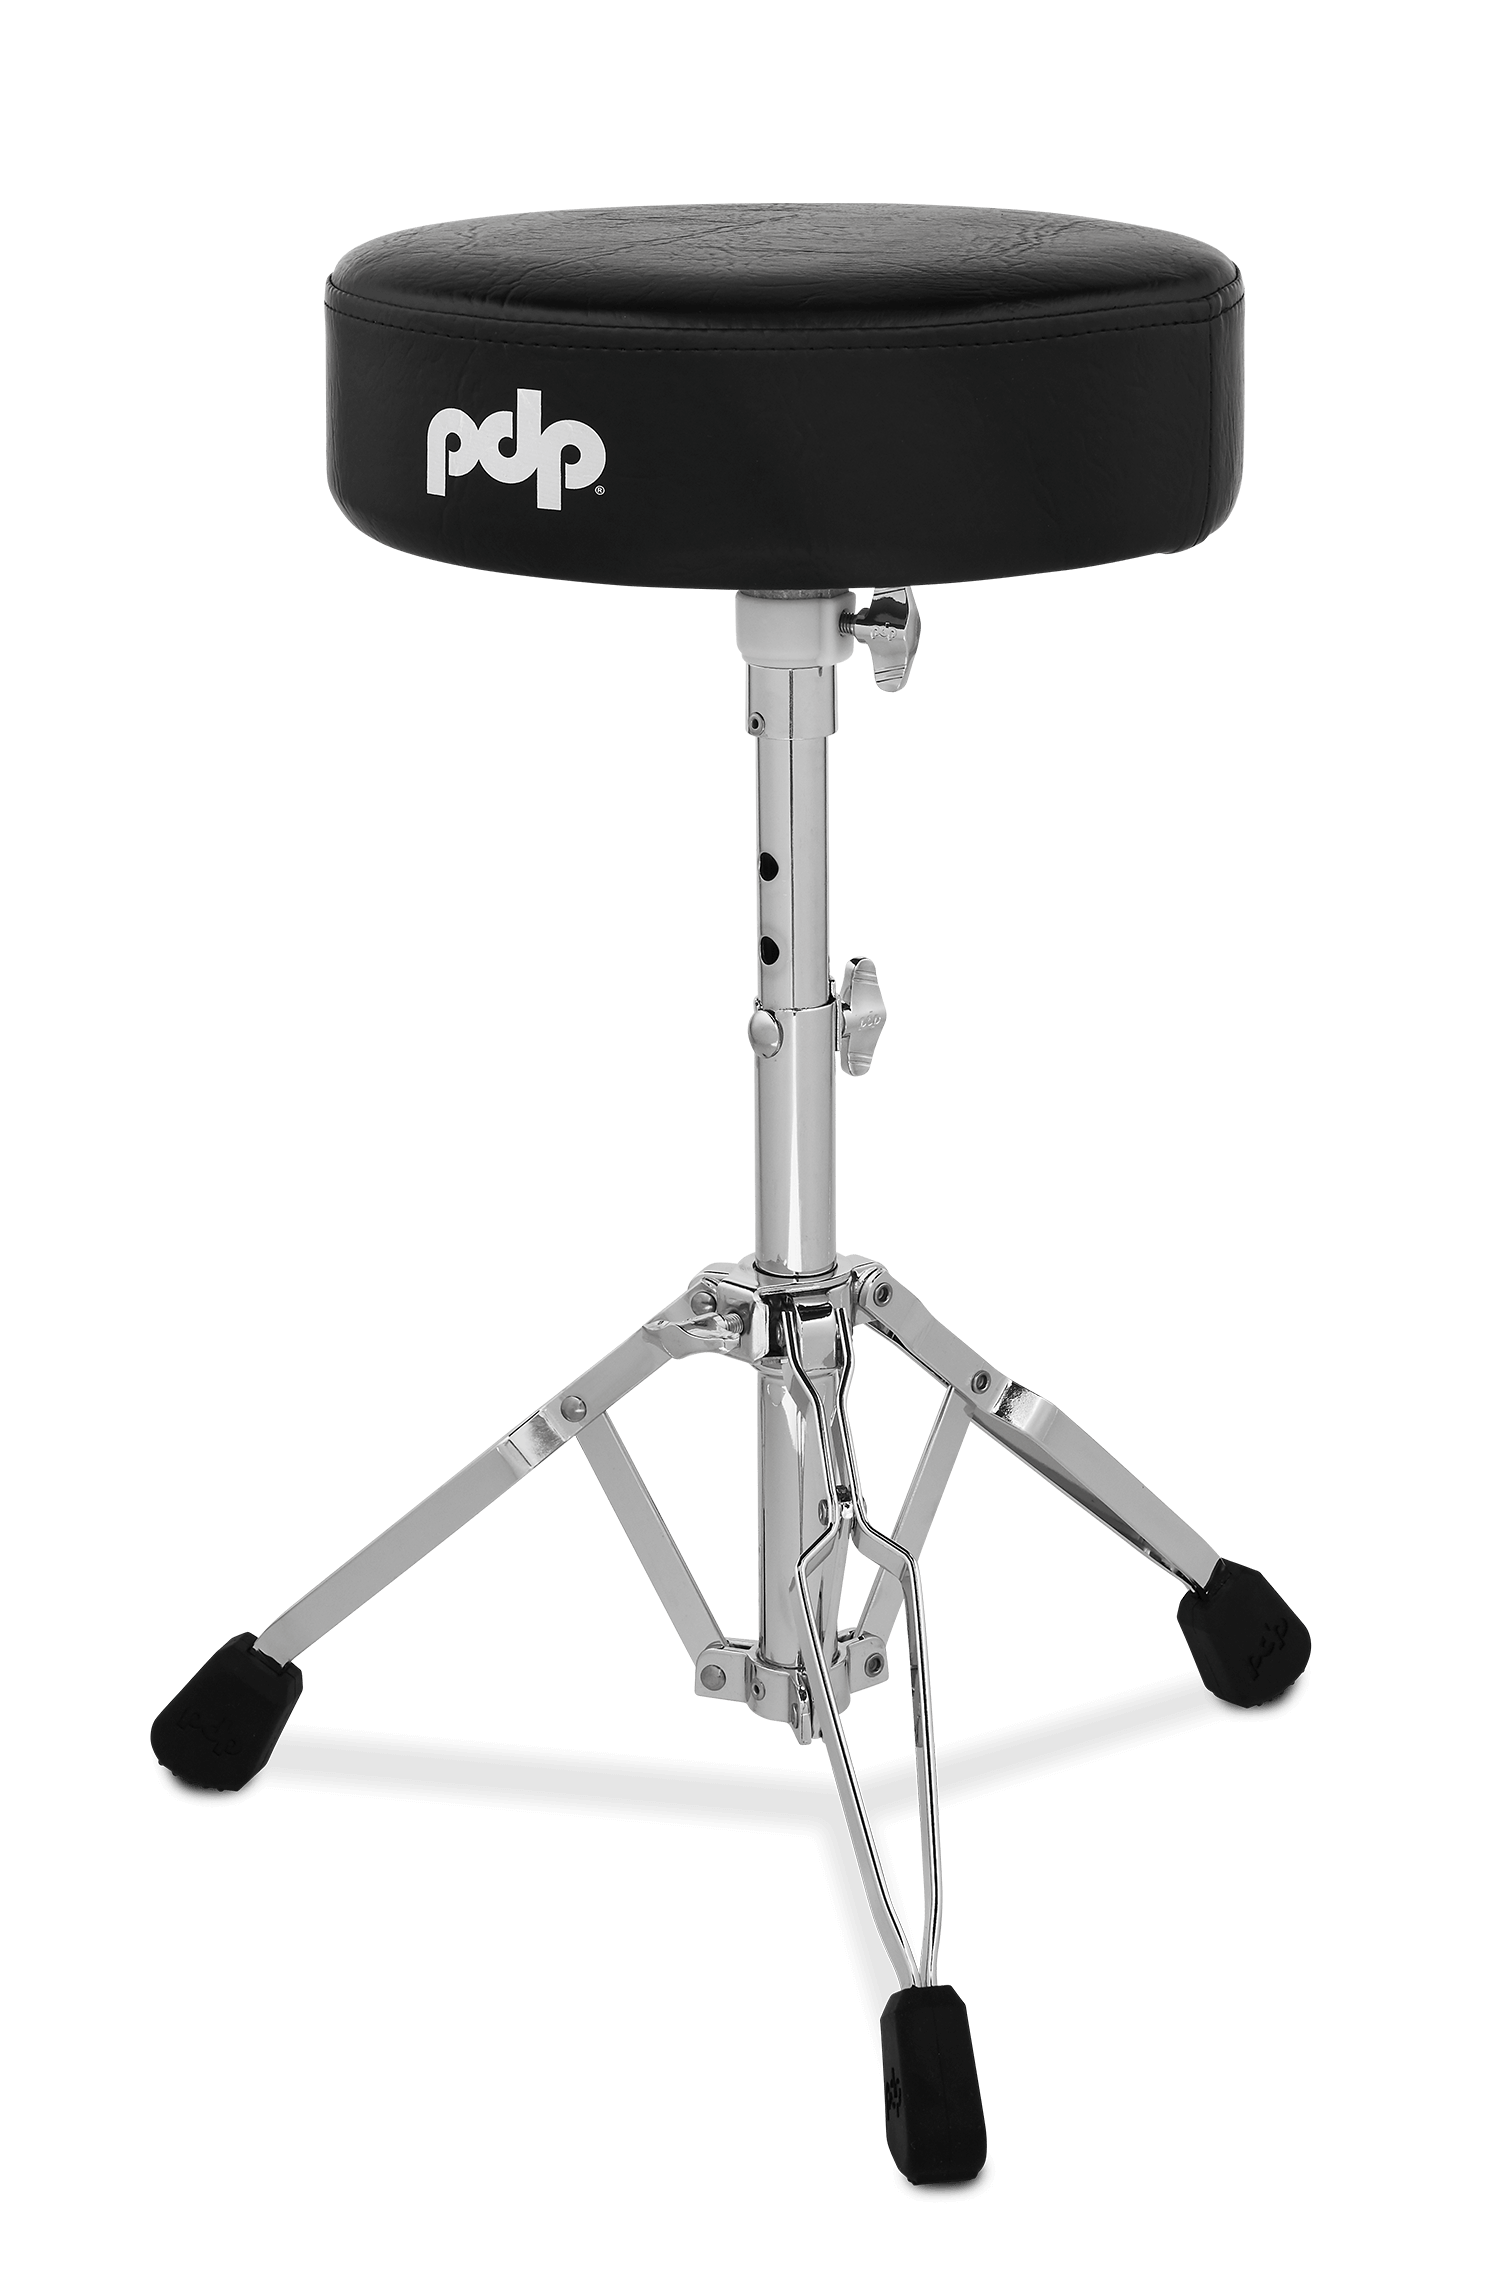 PDP 700 Series Drum Throne 12" Round Top